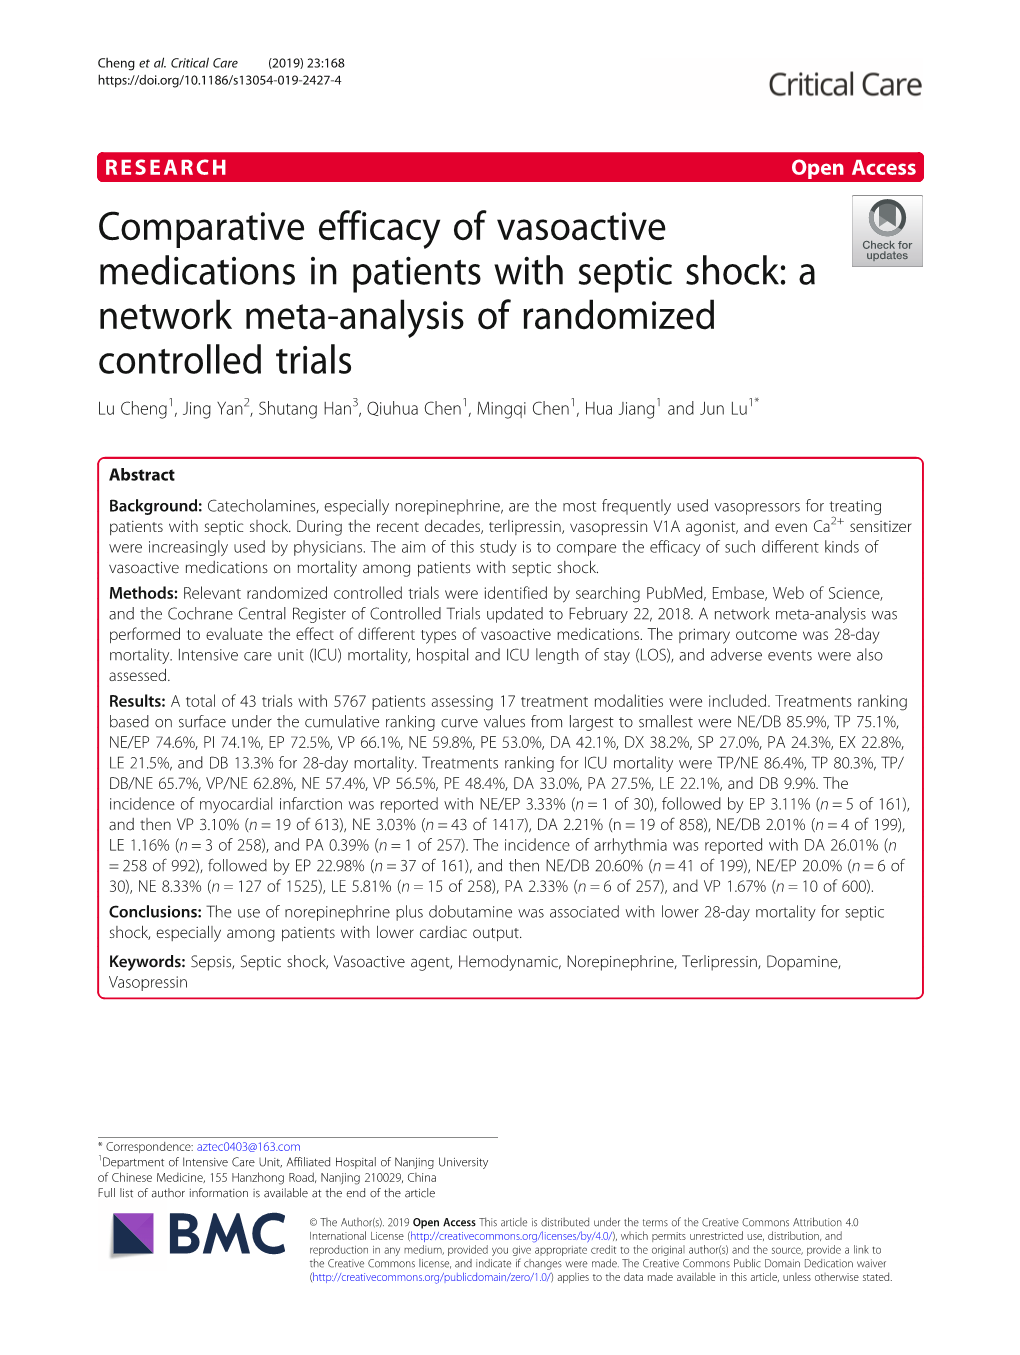 Comparative Efficacy of Vasoactive Medications in Patients with Septic